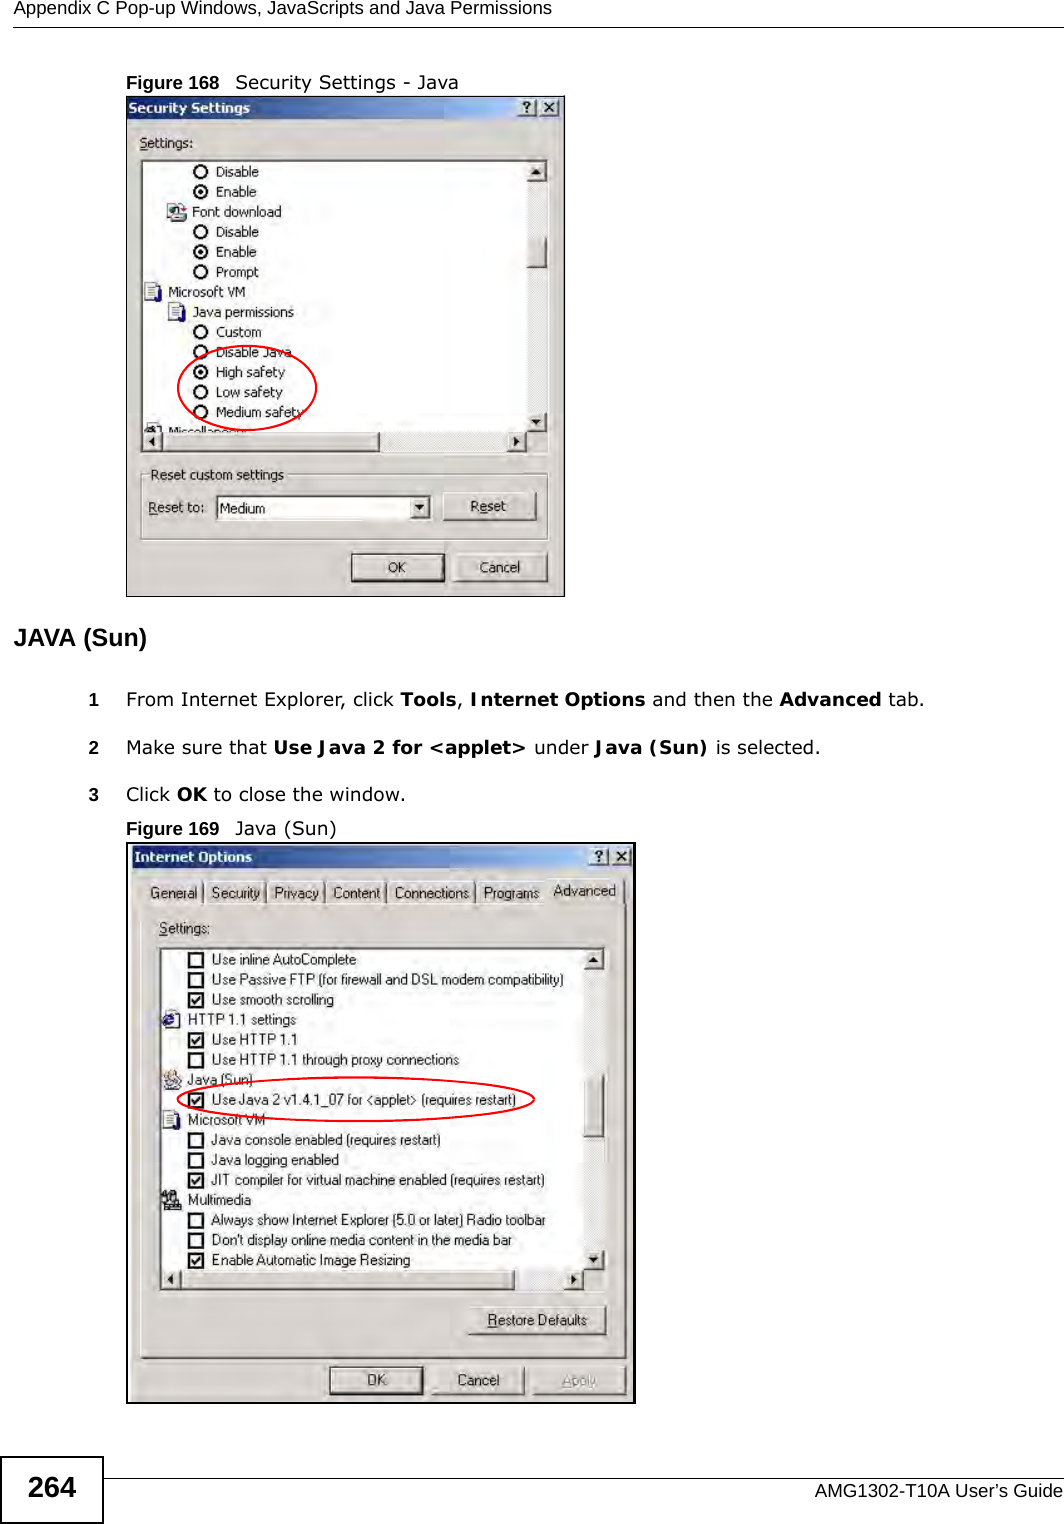 Appendix C Pop-up Windows, JavaScripts and Java PermissionsAMG1302-T10A User’s Guide264Figure 168   Security Settings - Java JAVA (Sun)1From Internet Explorer, click Tools, Internet Options and then the Advanced tab. 2Make sure that Use Java 2 for &lt;applet&gt; under Java (Sun) is selected.3Click OK to close the window.Figure 169   Java (Sun)